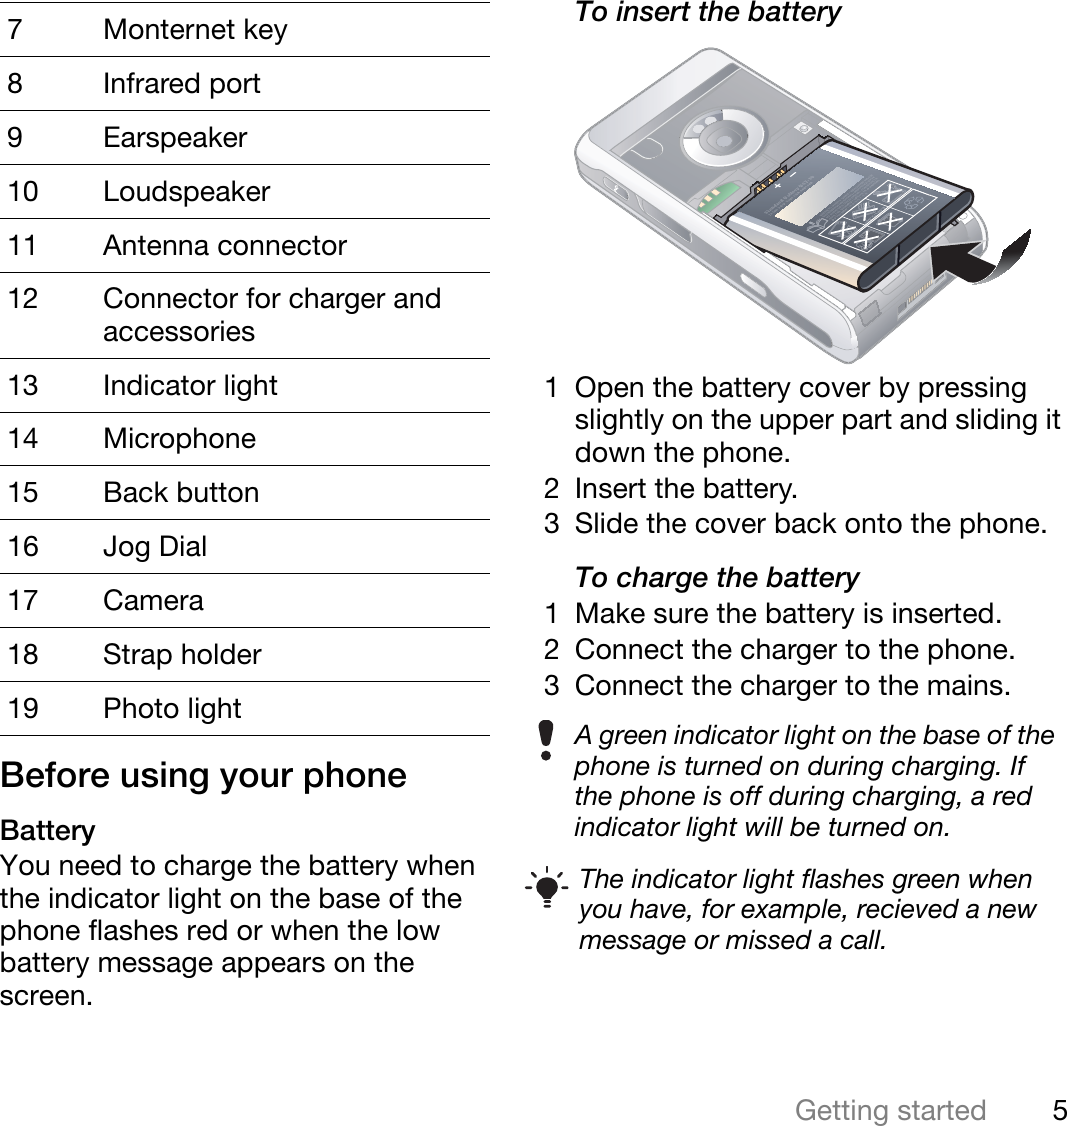 5Getting startedThis is the Internet version of the user&apos;s guide. © Print only for private use.Before using your phoneBatteryYou need to charge the battery when the indicator light on the base of the phone flashes red or when the low battery message appears on the screen.To insert the battery1 Open the battery cover by pressing slightly on the upper part and sliding it down the phone.2 Insert the battery.3 Slide the cover back onto the phone.To charge the battery1 Make sure the battery is inserted.2 Connect the charger to the phone.3 Connect the charger to the mains.7 Monternet key8 Infrared port9Earspeaker10 Loudspeaker11 Antenna connector12 Connector for charger and accessories13 Indicator light14 Microphone15 Back button16 Jog Dial17 Camera18 Strap holder19 Photo lightA green indicator light on the base of the phone is turned on during charging. If the phone is off during charging, a red indicator light will be turned on.The indicator light flashes green when you have, for example, recieved a new message or missed a call.